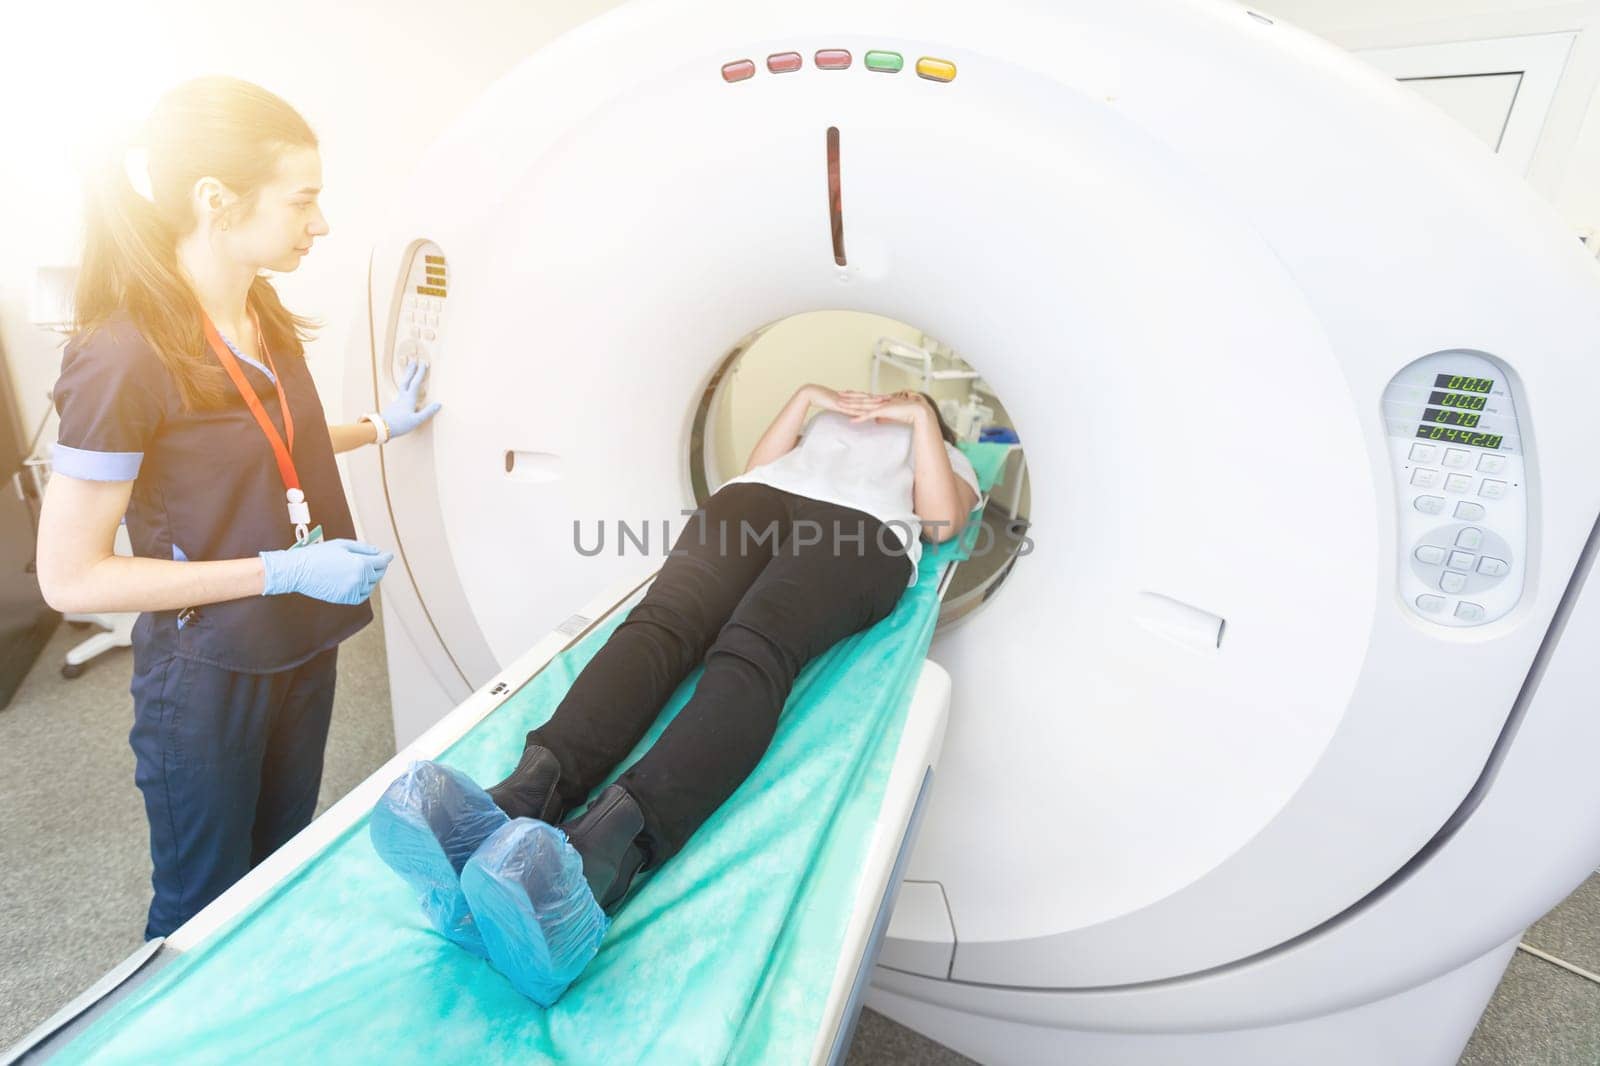 Radiologist with a female patient in the room of computed tomography